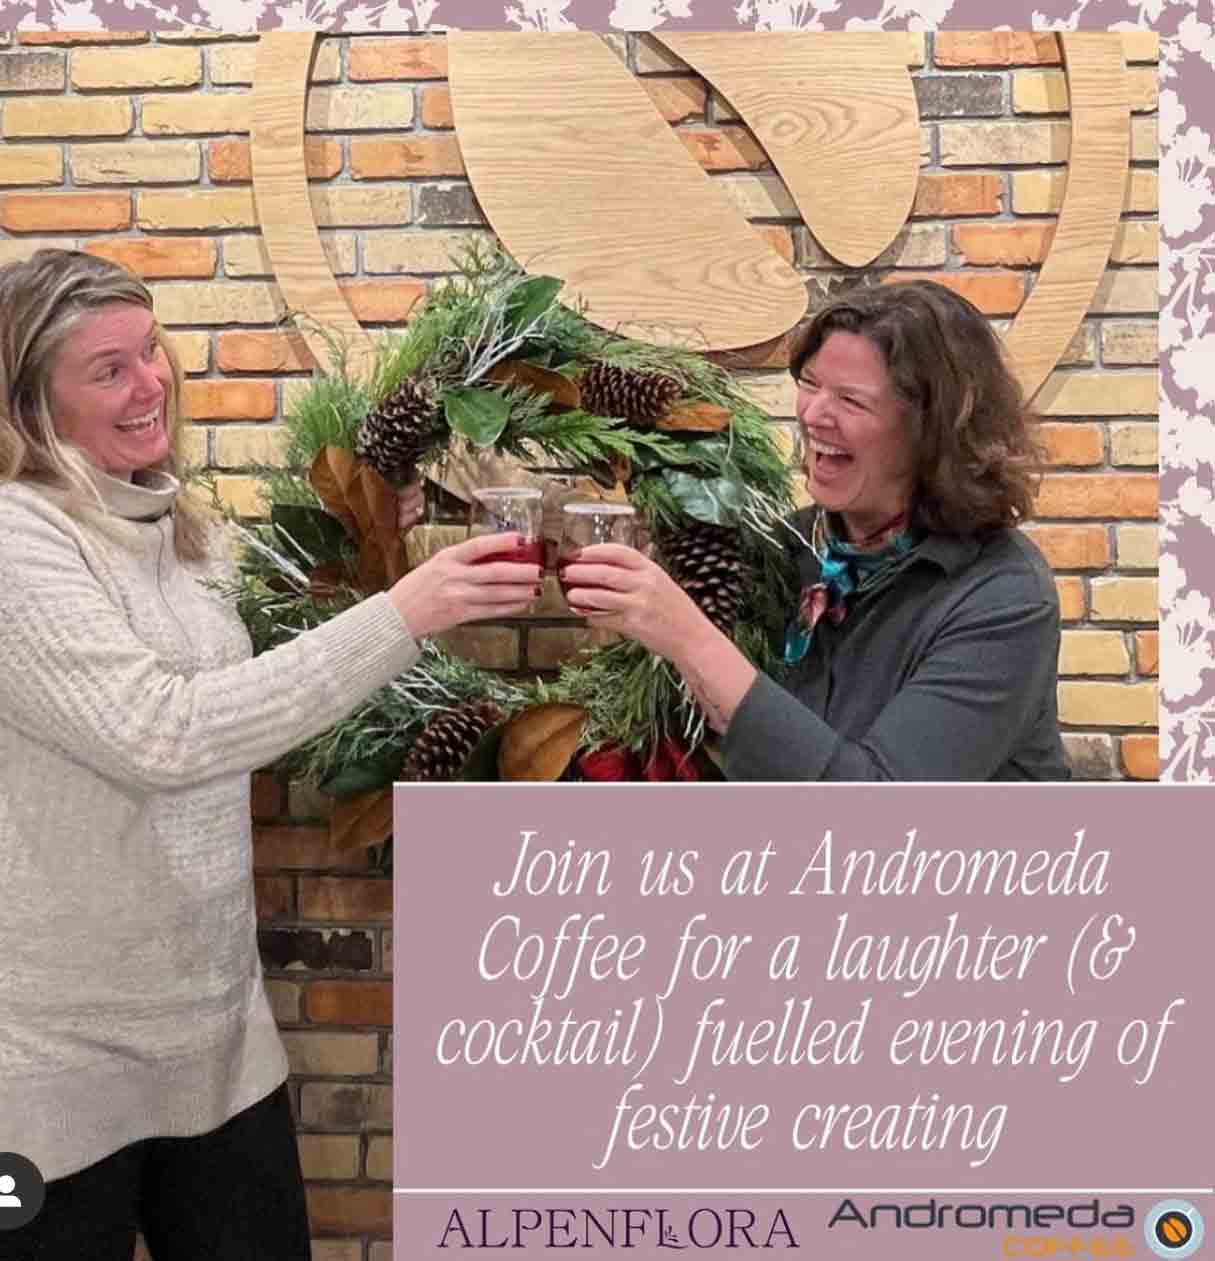 Join Shelley from Andromeda Coffee and Colleen, Christmas Queen from Alpenflora